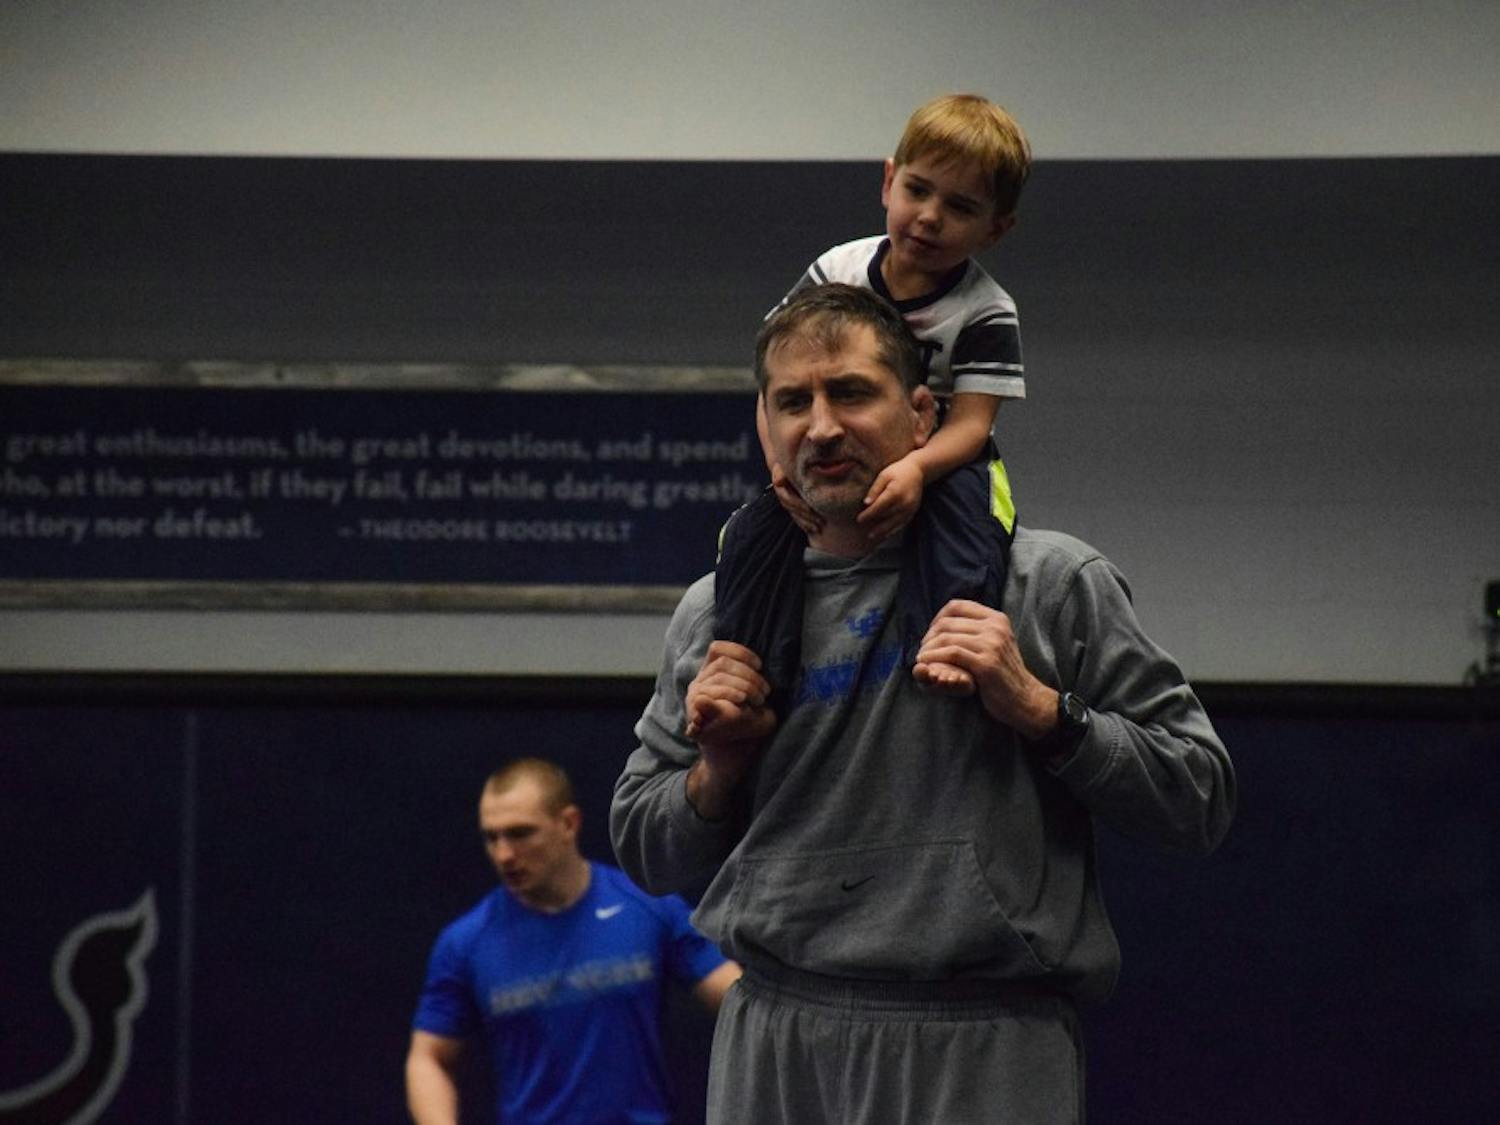 John Stutzman is UB’s head wrestling coach. It has been his dream since he was a wrestler here in the 1990s.